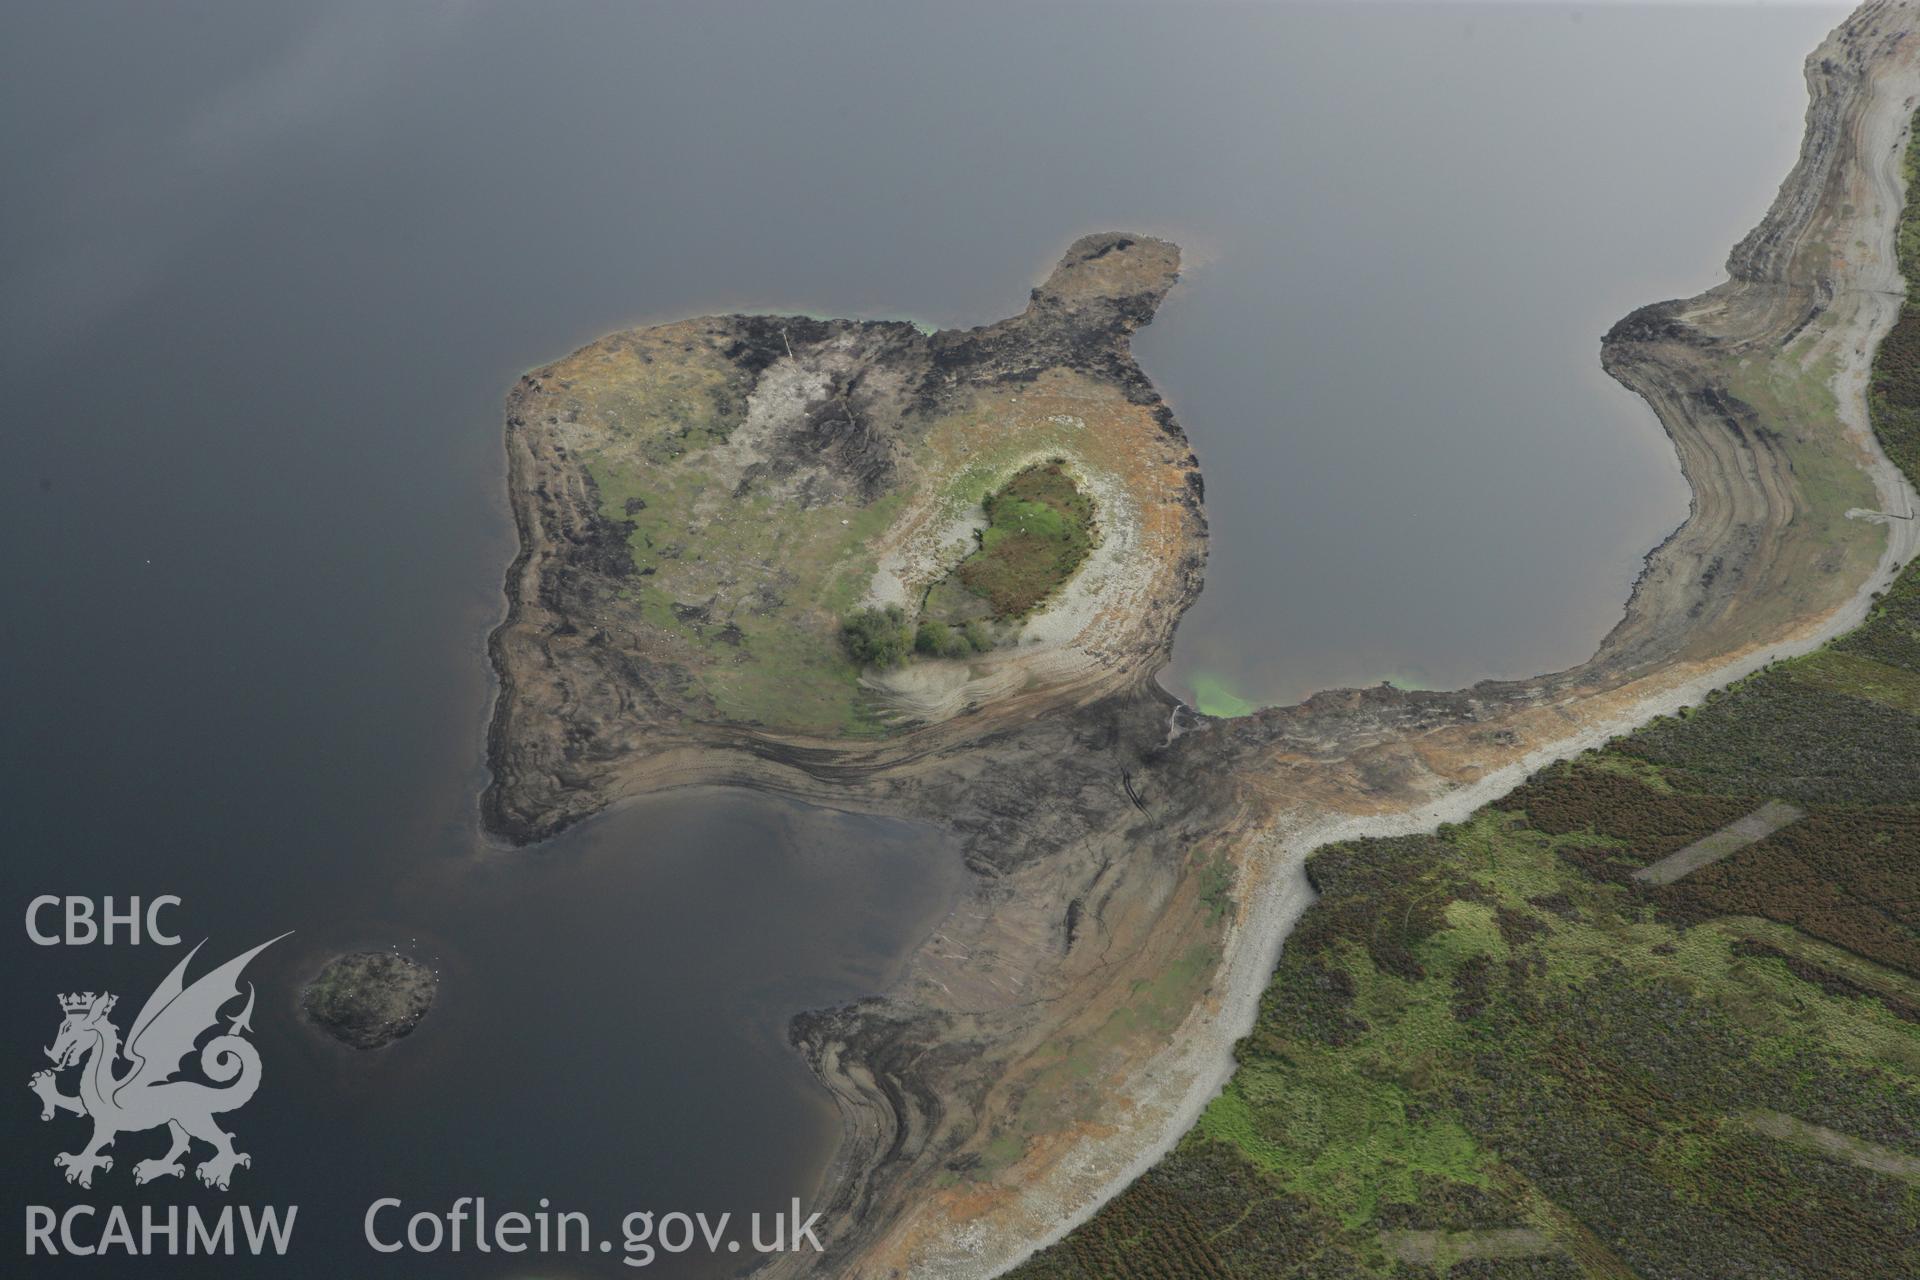 RCAHMW colour oblique aerial photograph of Cefn Brenig Tumulus (Brenig 41). Taken on 13 October 2009 by Toby Driver